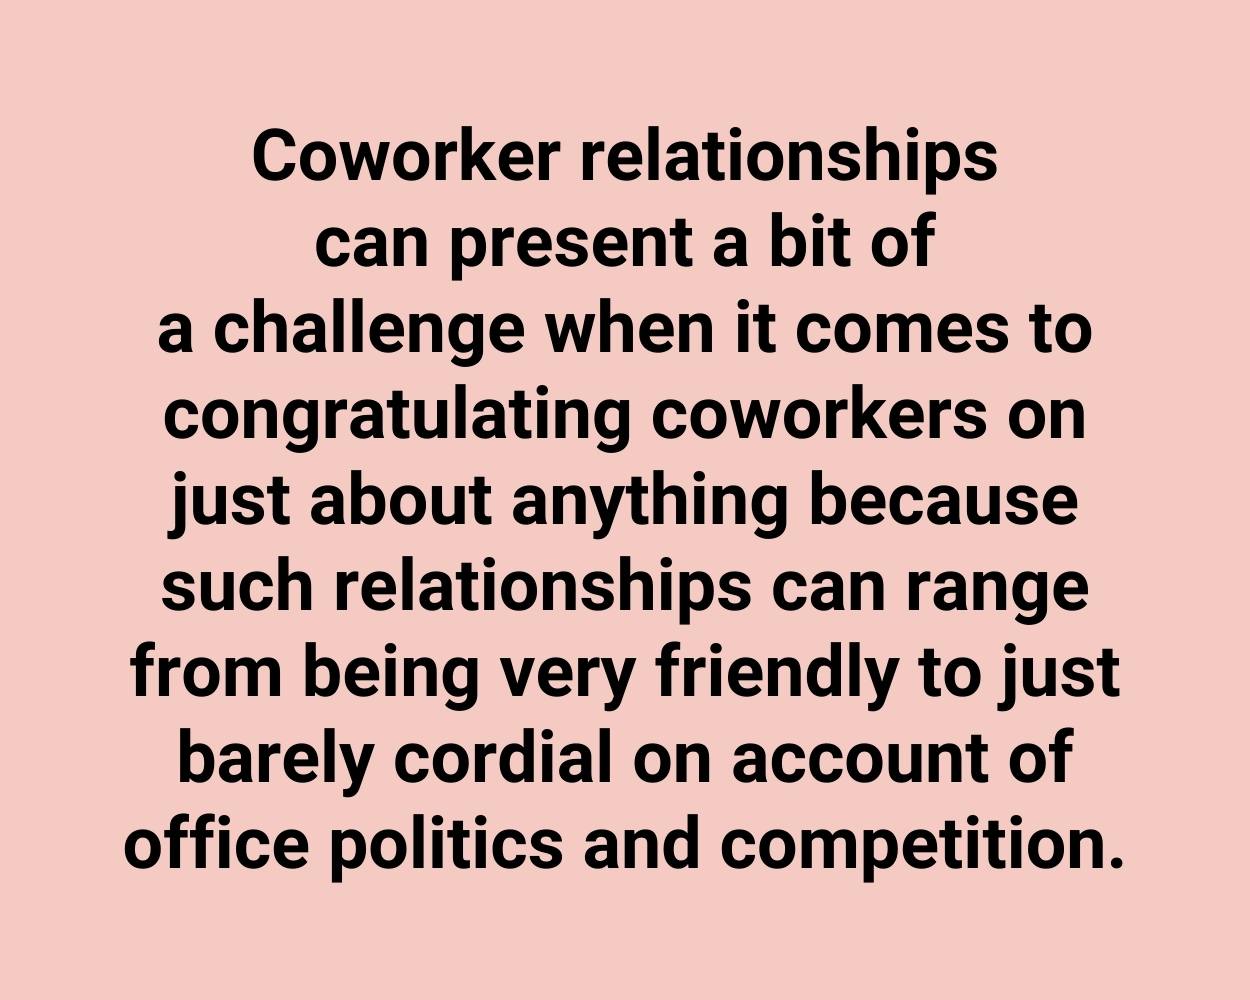 Coworker relationships can present a bit of a challenge when it comes to congratulating coworkers on just about anything because such relationships can range from being very friendly to just barely cordial on account of office politics and competition.